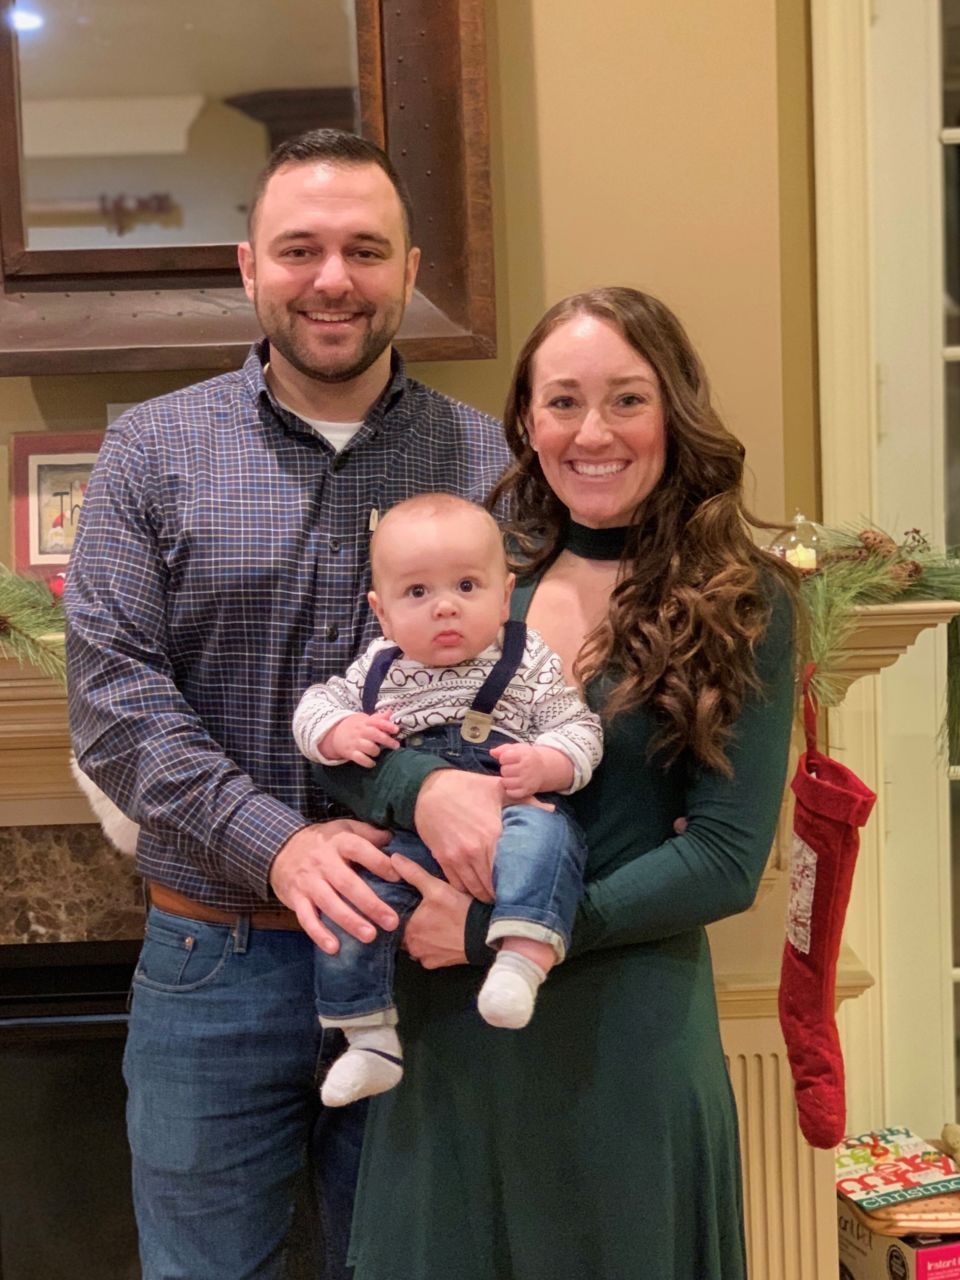 Corbin and his wife with their son Dane